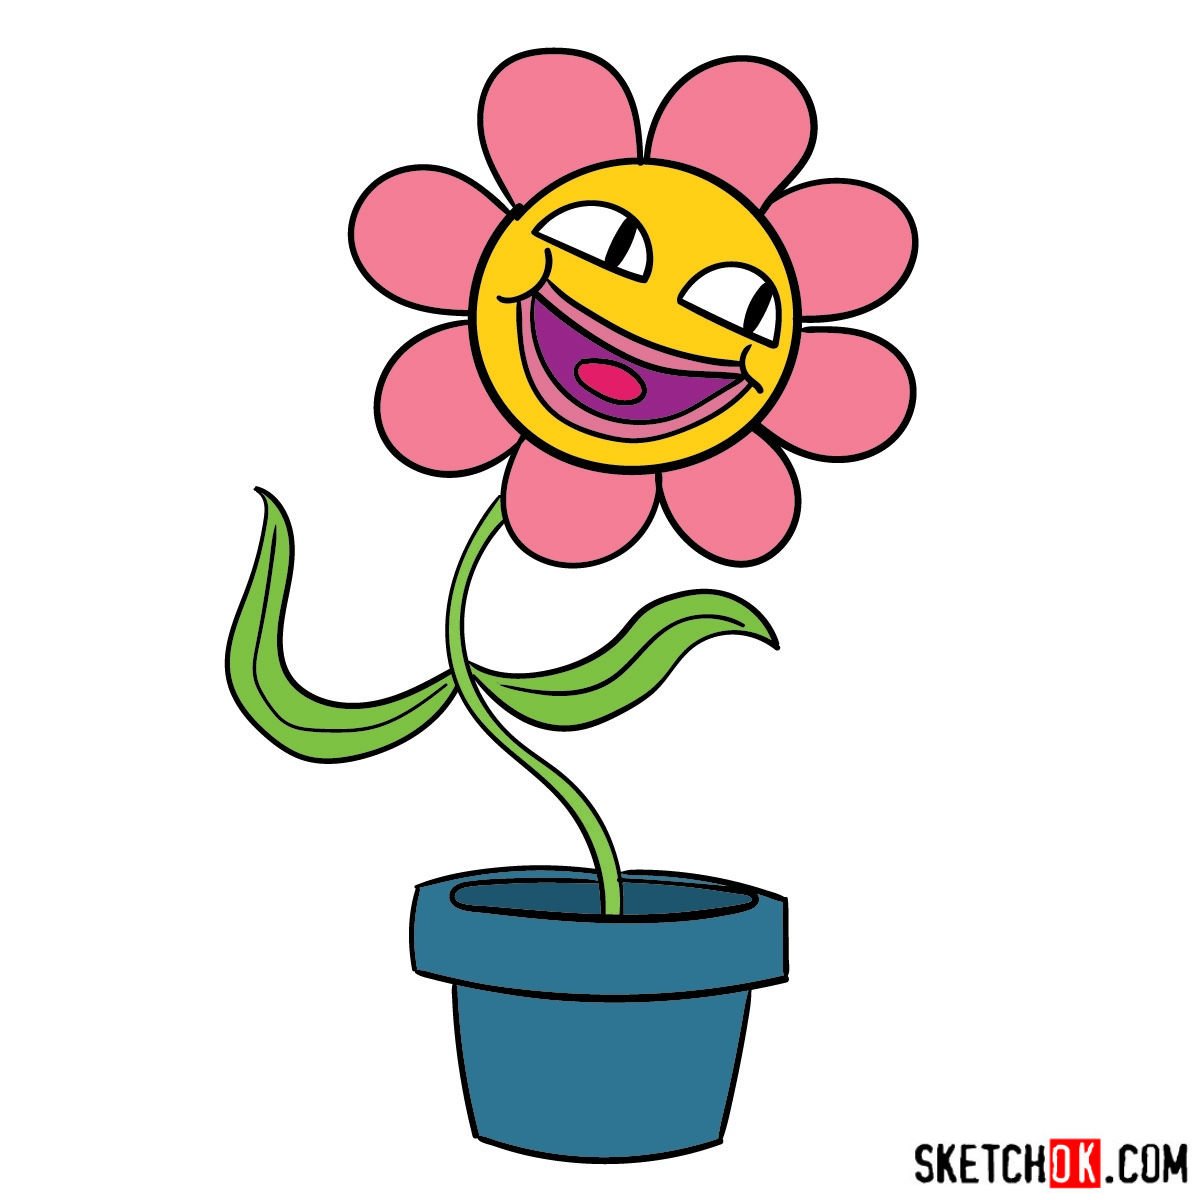 How to draw a flower Leslie from Gumball series